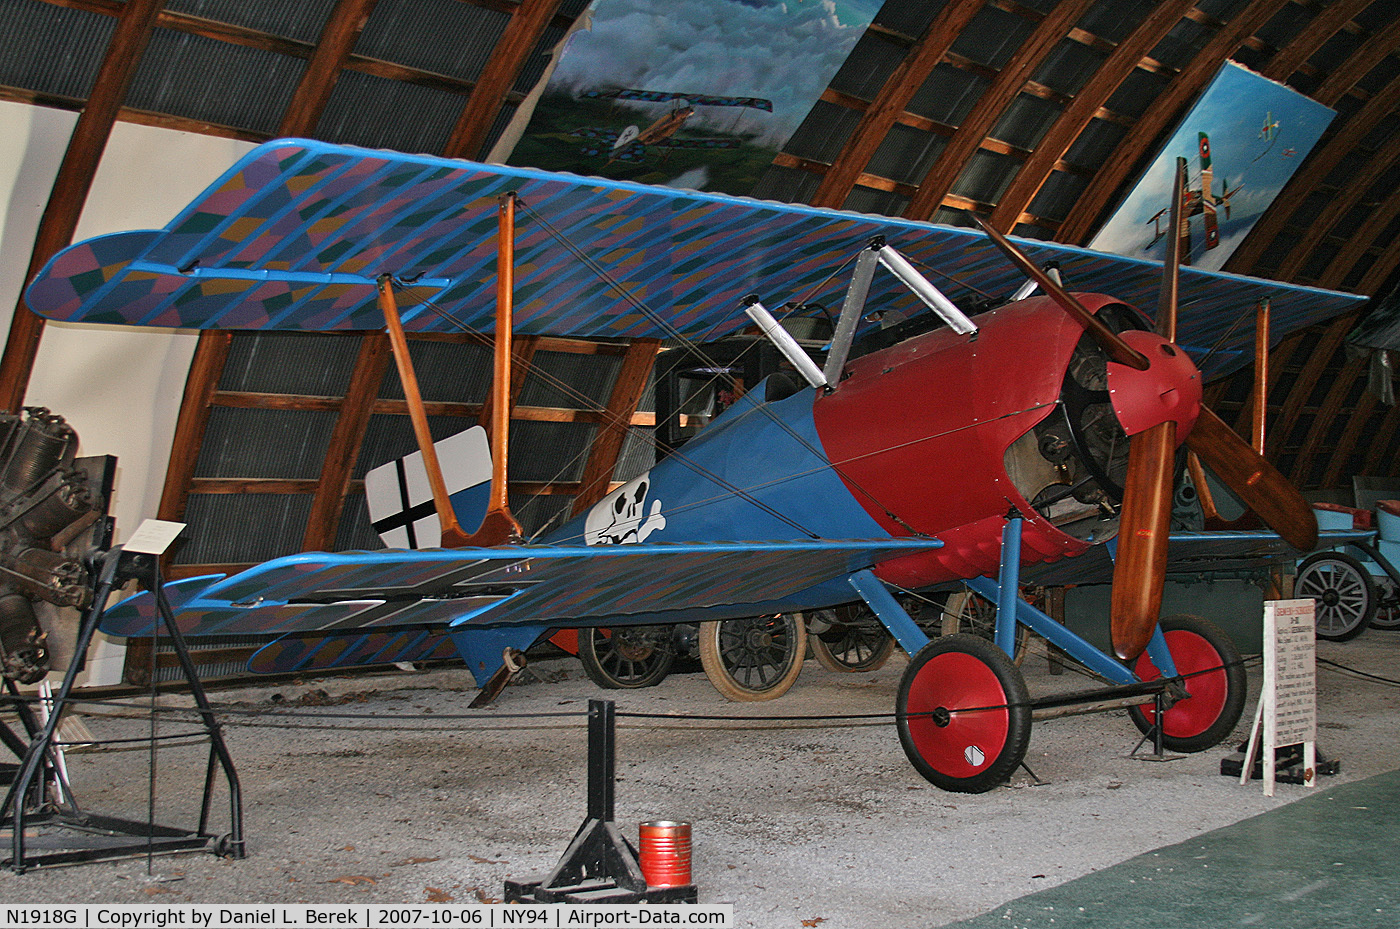 N1918G, 1976 Palen Siemens-schuckert D-III Replica C/N 1918-70, This beautiful and unusual bird is an excellent reproduction of a rare aircraft by Cole Palen.